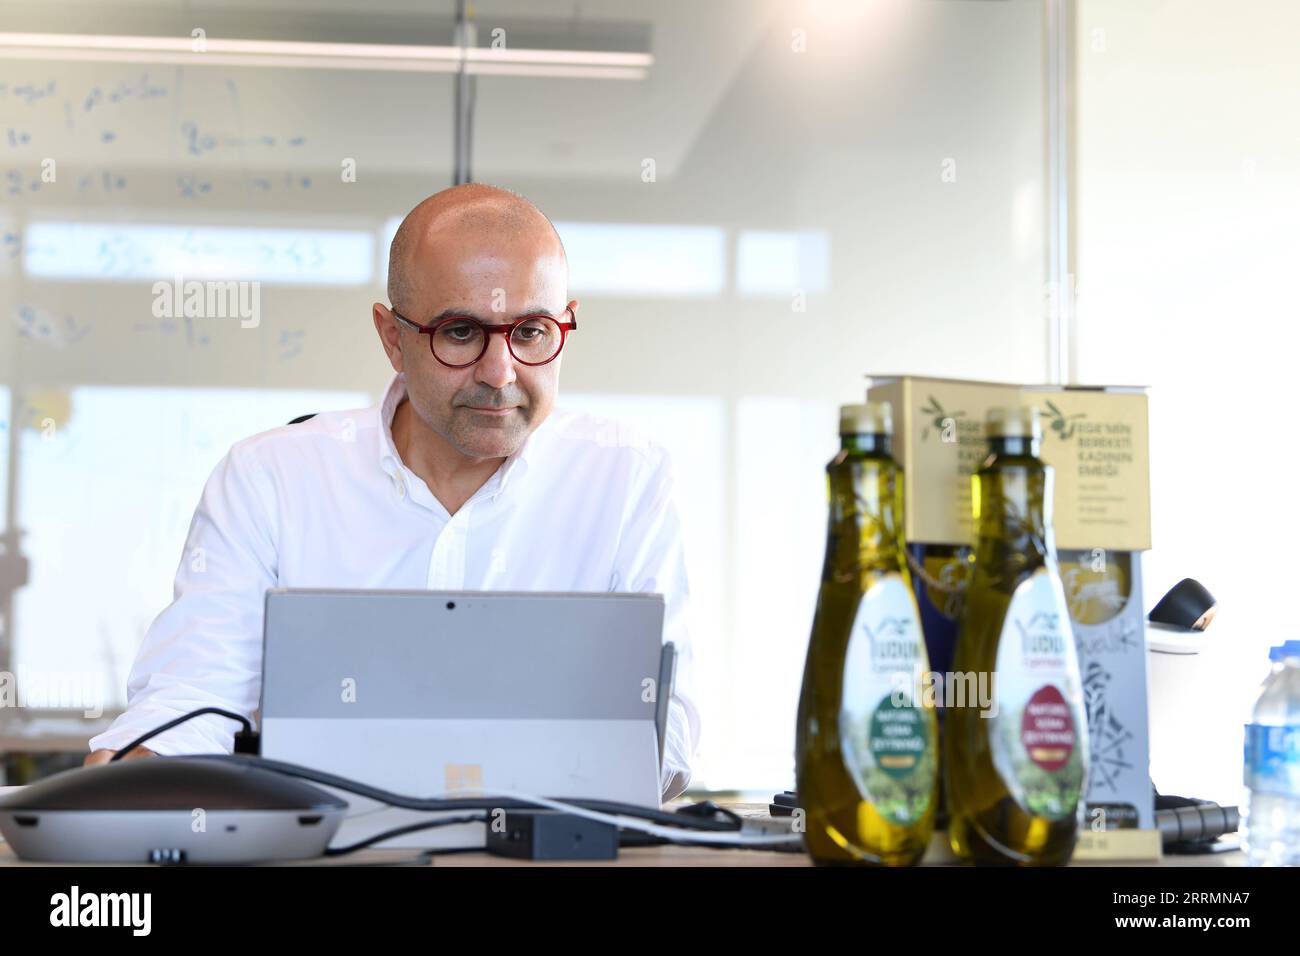 221108 -- ISTANBUL, Nov. 8, 2022 -- Houmer Balazadeh, general manager of Savola Foods, one of leading Turkish olive oil producers, works in the company s headquarters in Istanbul, Trkiye, on Nov. 1, 2022. Turkish companies view the on-going 5th China International Import Expo CIIE as a premium platform to seek business opportunities and further tap into the vast consumer market of China and beyond. TO GO WITH Roundup: Turkish companies eye vast business opportunities at China s import expo  TRKIYE-CHINA-CIIE-BUSINESS OPPORTUNITIES Shadati PUBLICATIONxNOTxINxCHN Stock Photo